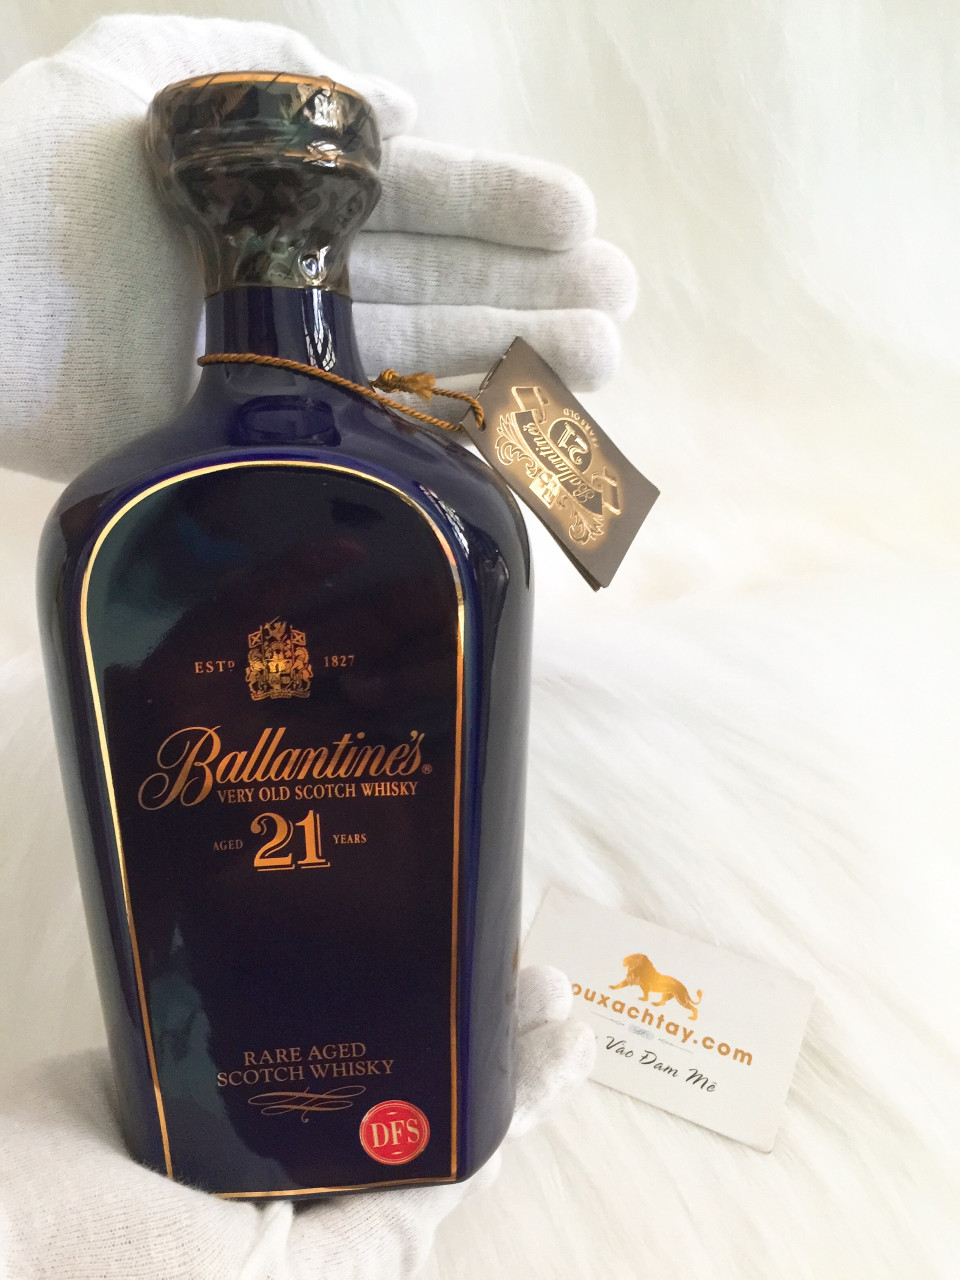 Ballantine's 21 years old - Limited Edition For DFS